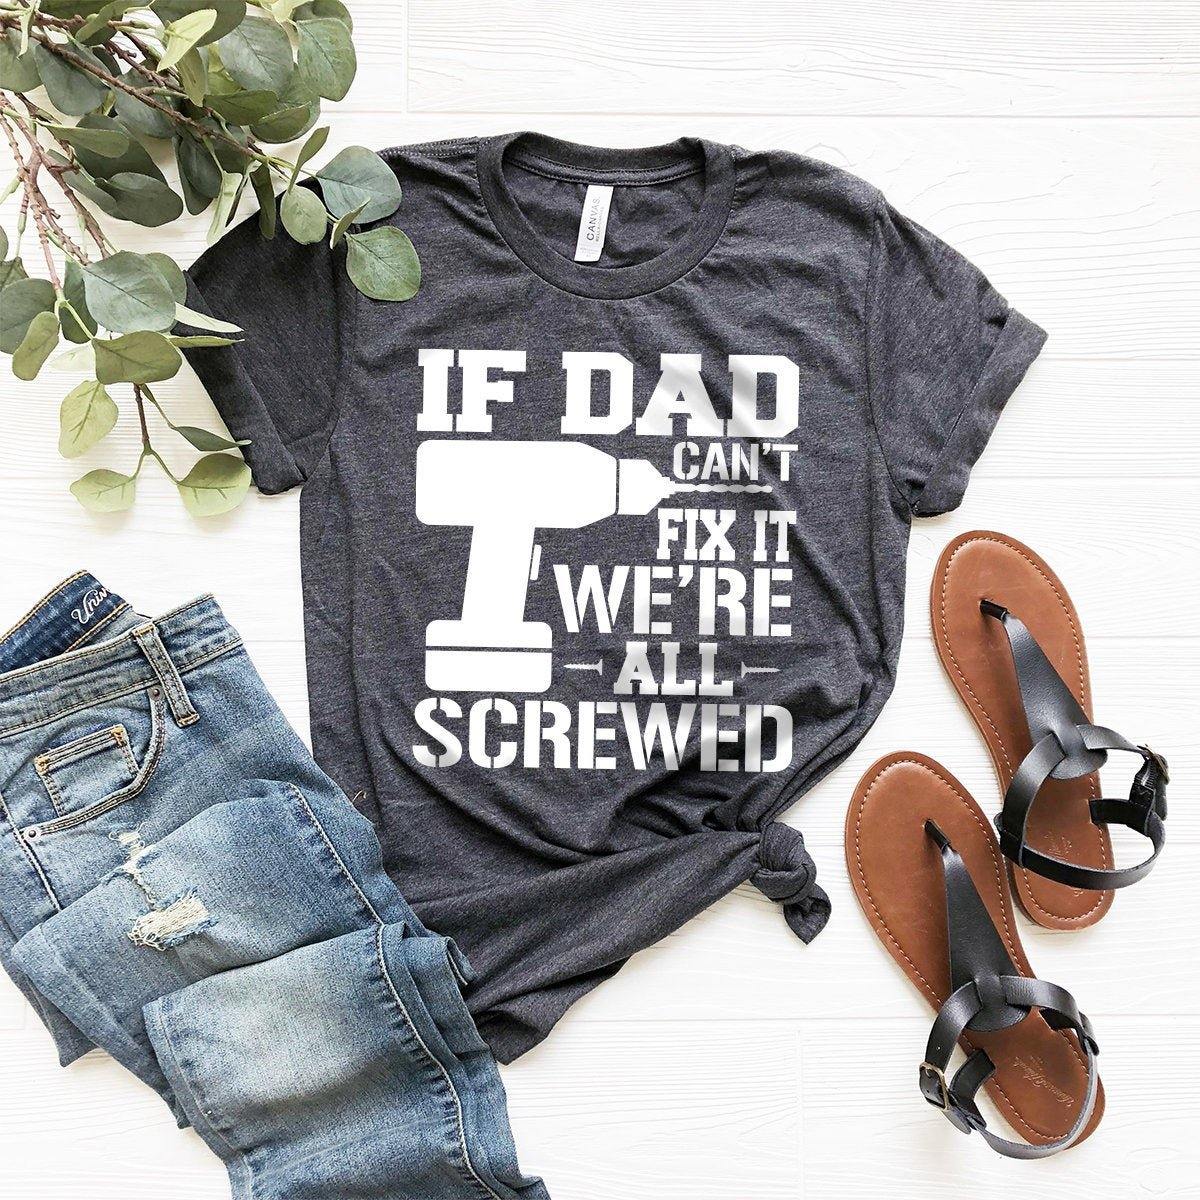 Dad Shirt, Funny Dad Shirt, If Dad Can't Fix It We're All Screwed Shirt, Dad Gift, Gift For Dad, Father Shirt, Father Gift, Father's Day Tee - Fastdeliverytees.com